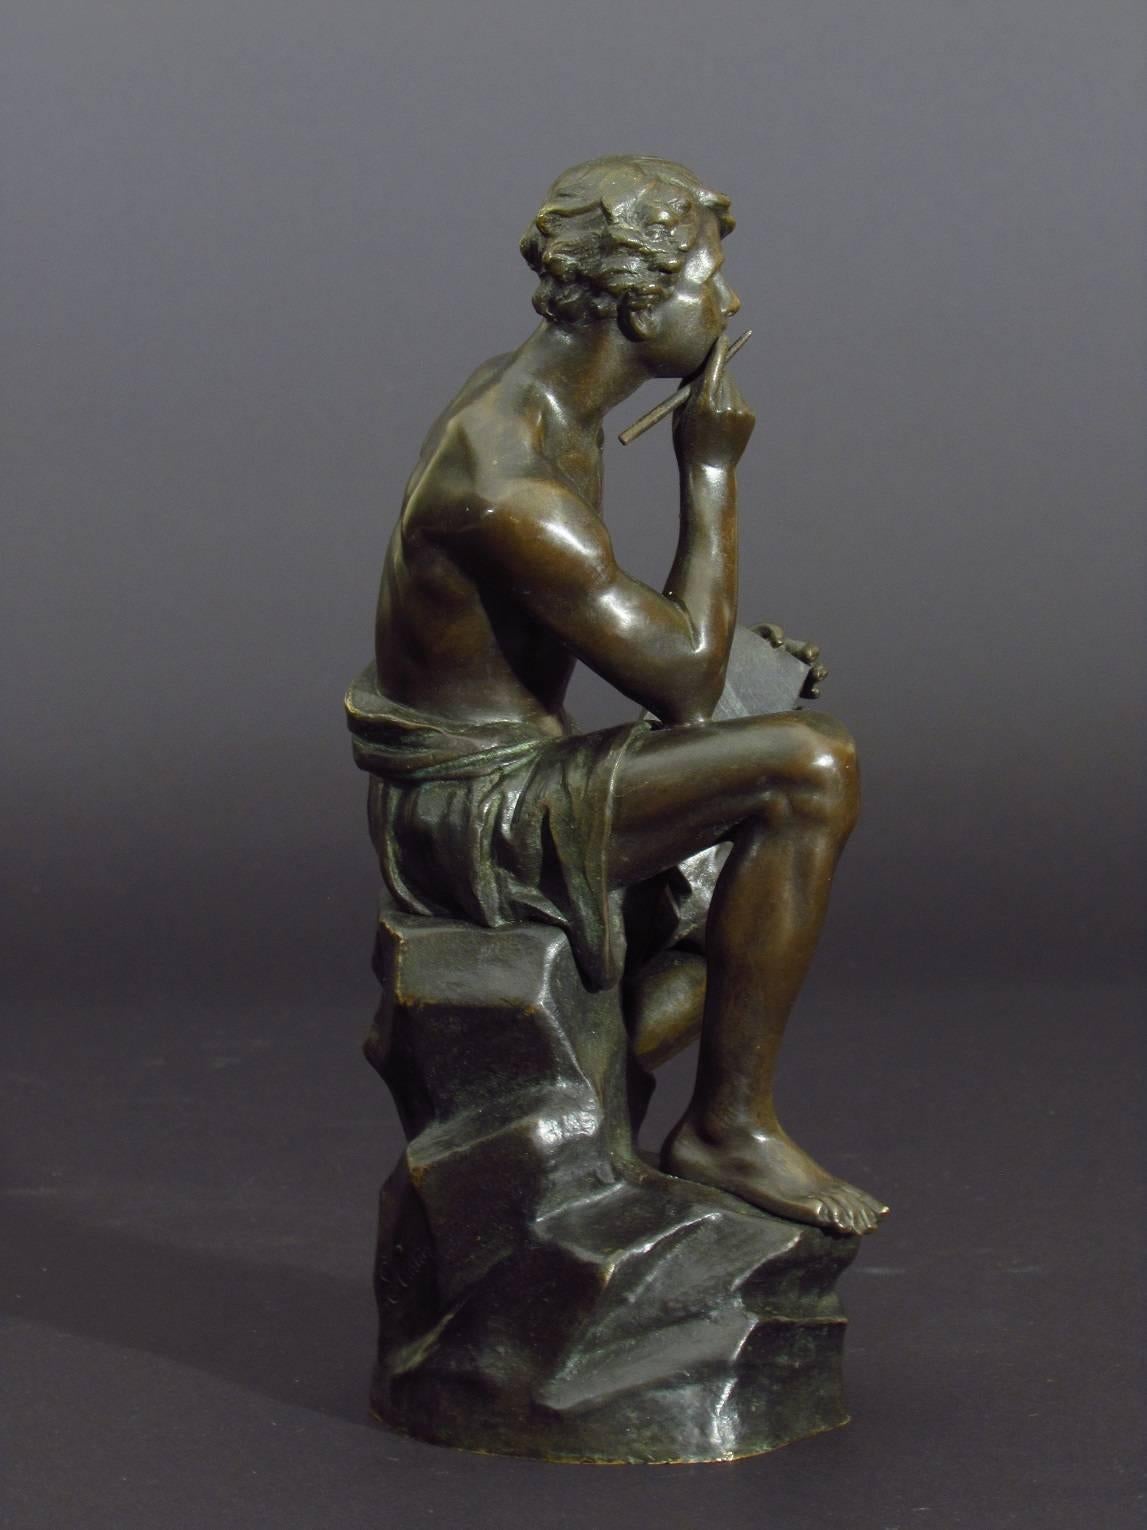 Seated Youth - Sculpture by Émile Nestor Joseph Carlier